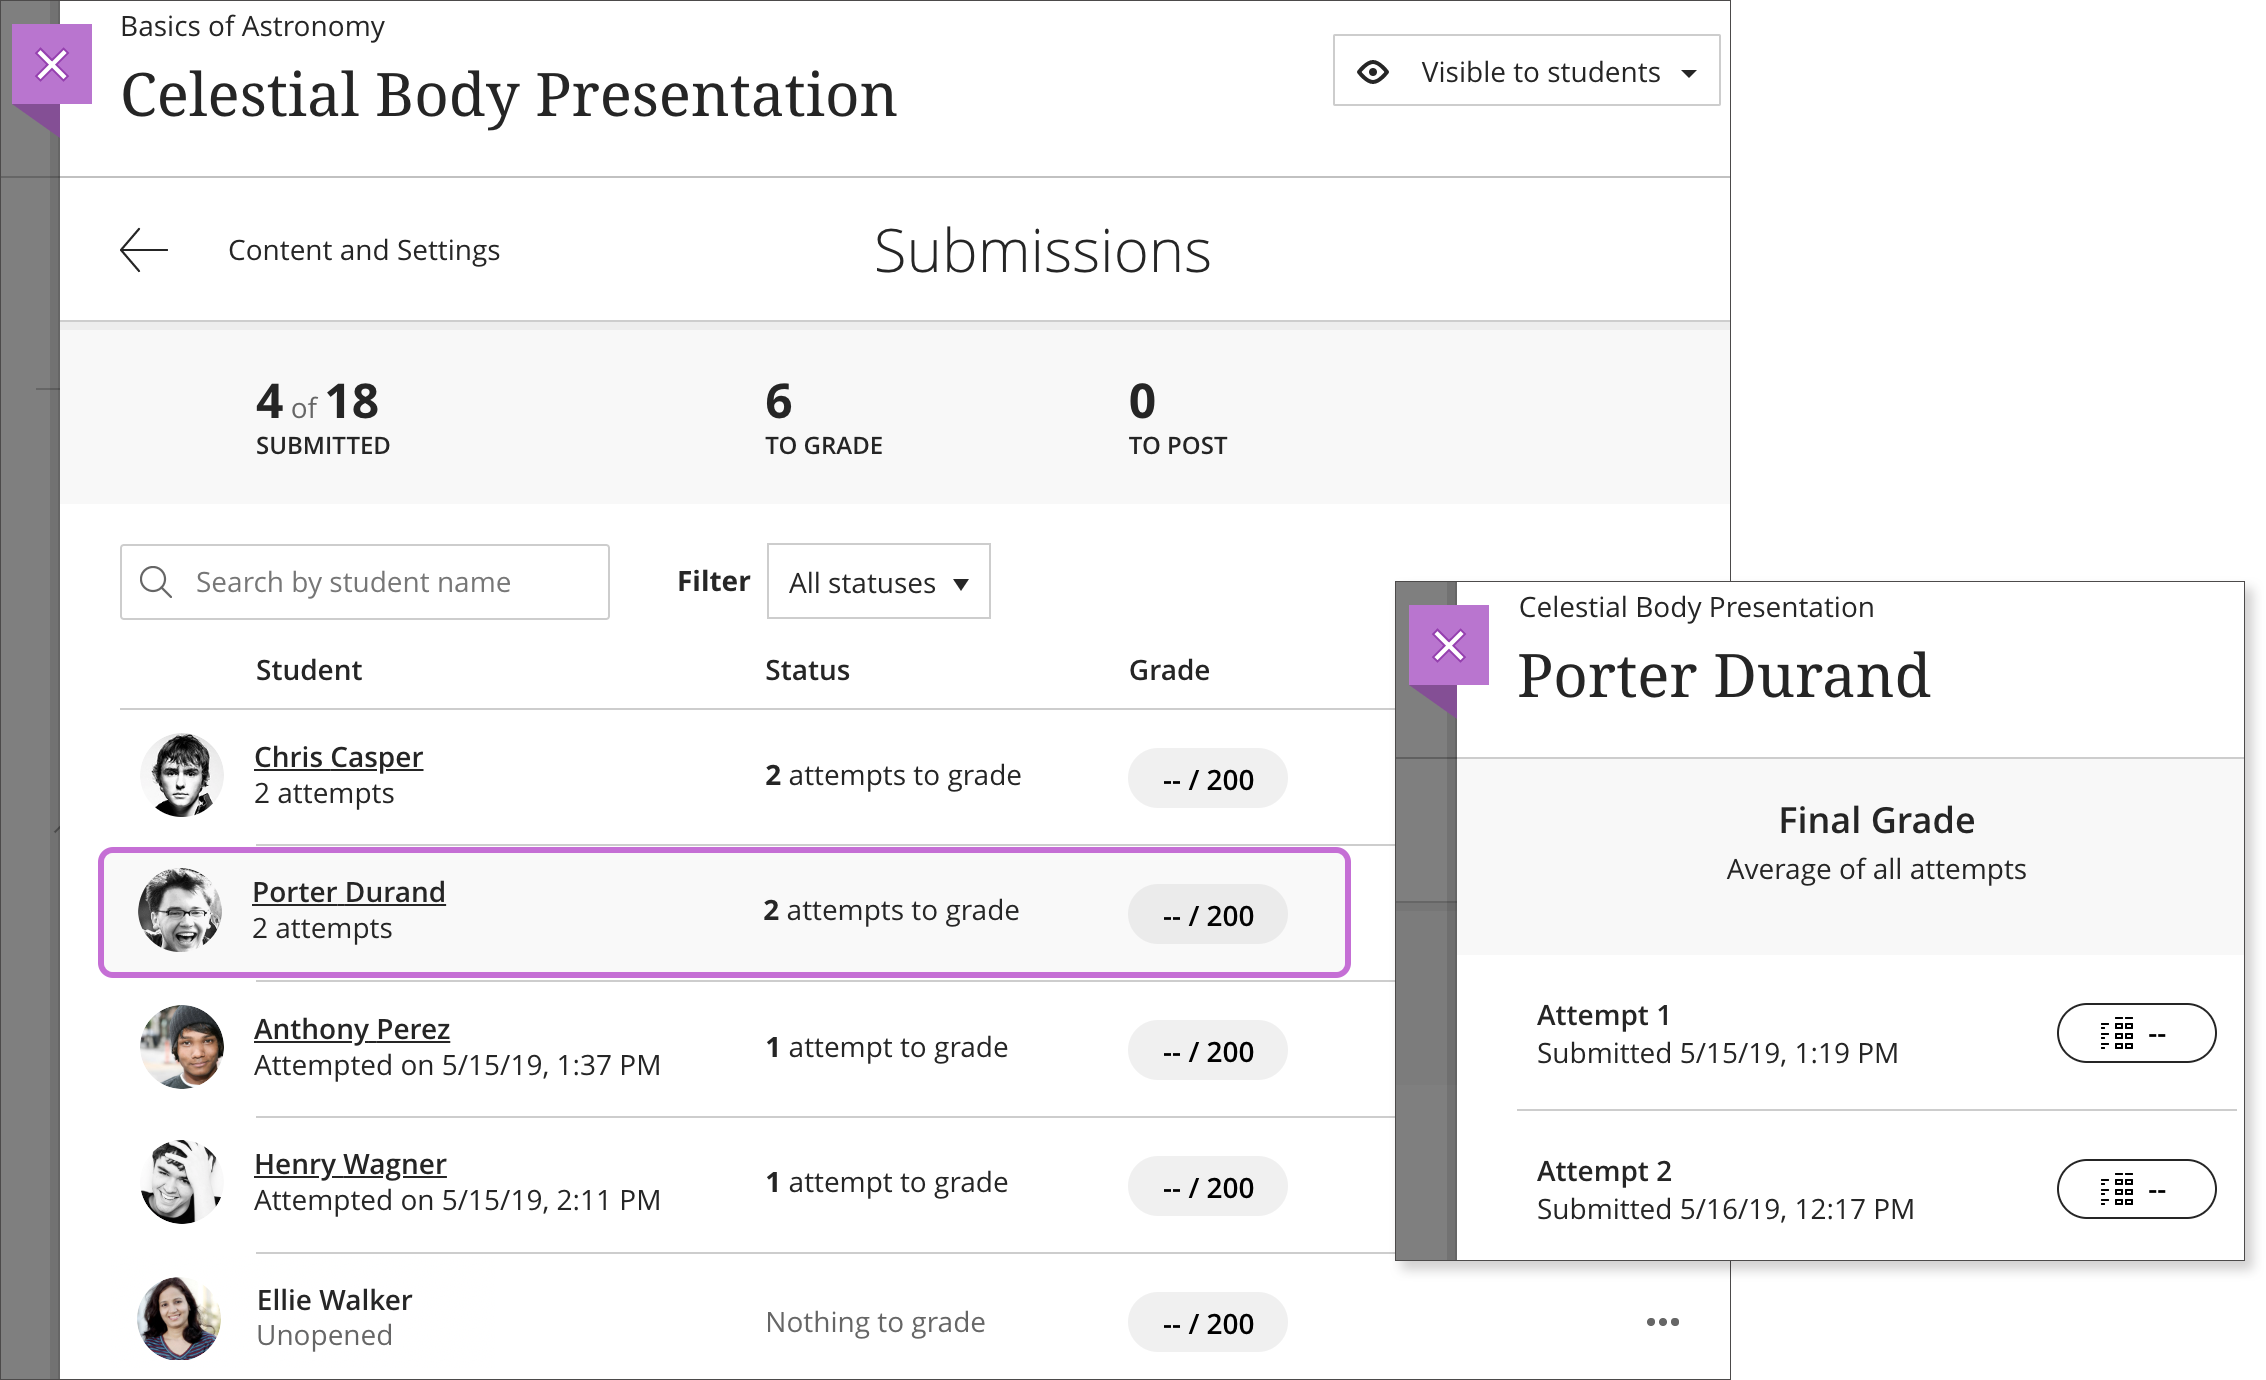 The Submissions page is open with 1) the submissions list displayed, 2) an example username selected and highlighted, and 3) the Multiple Attempts grading panel opened with two attempts submitted.